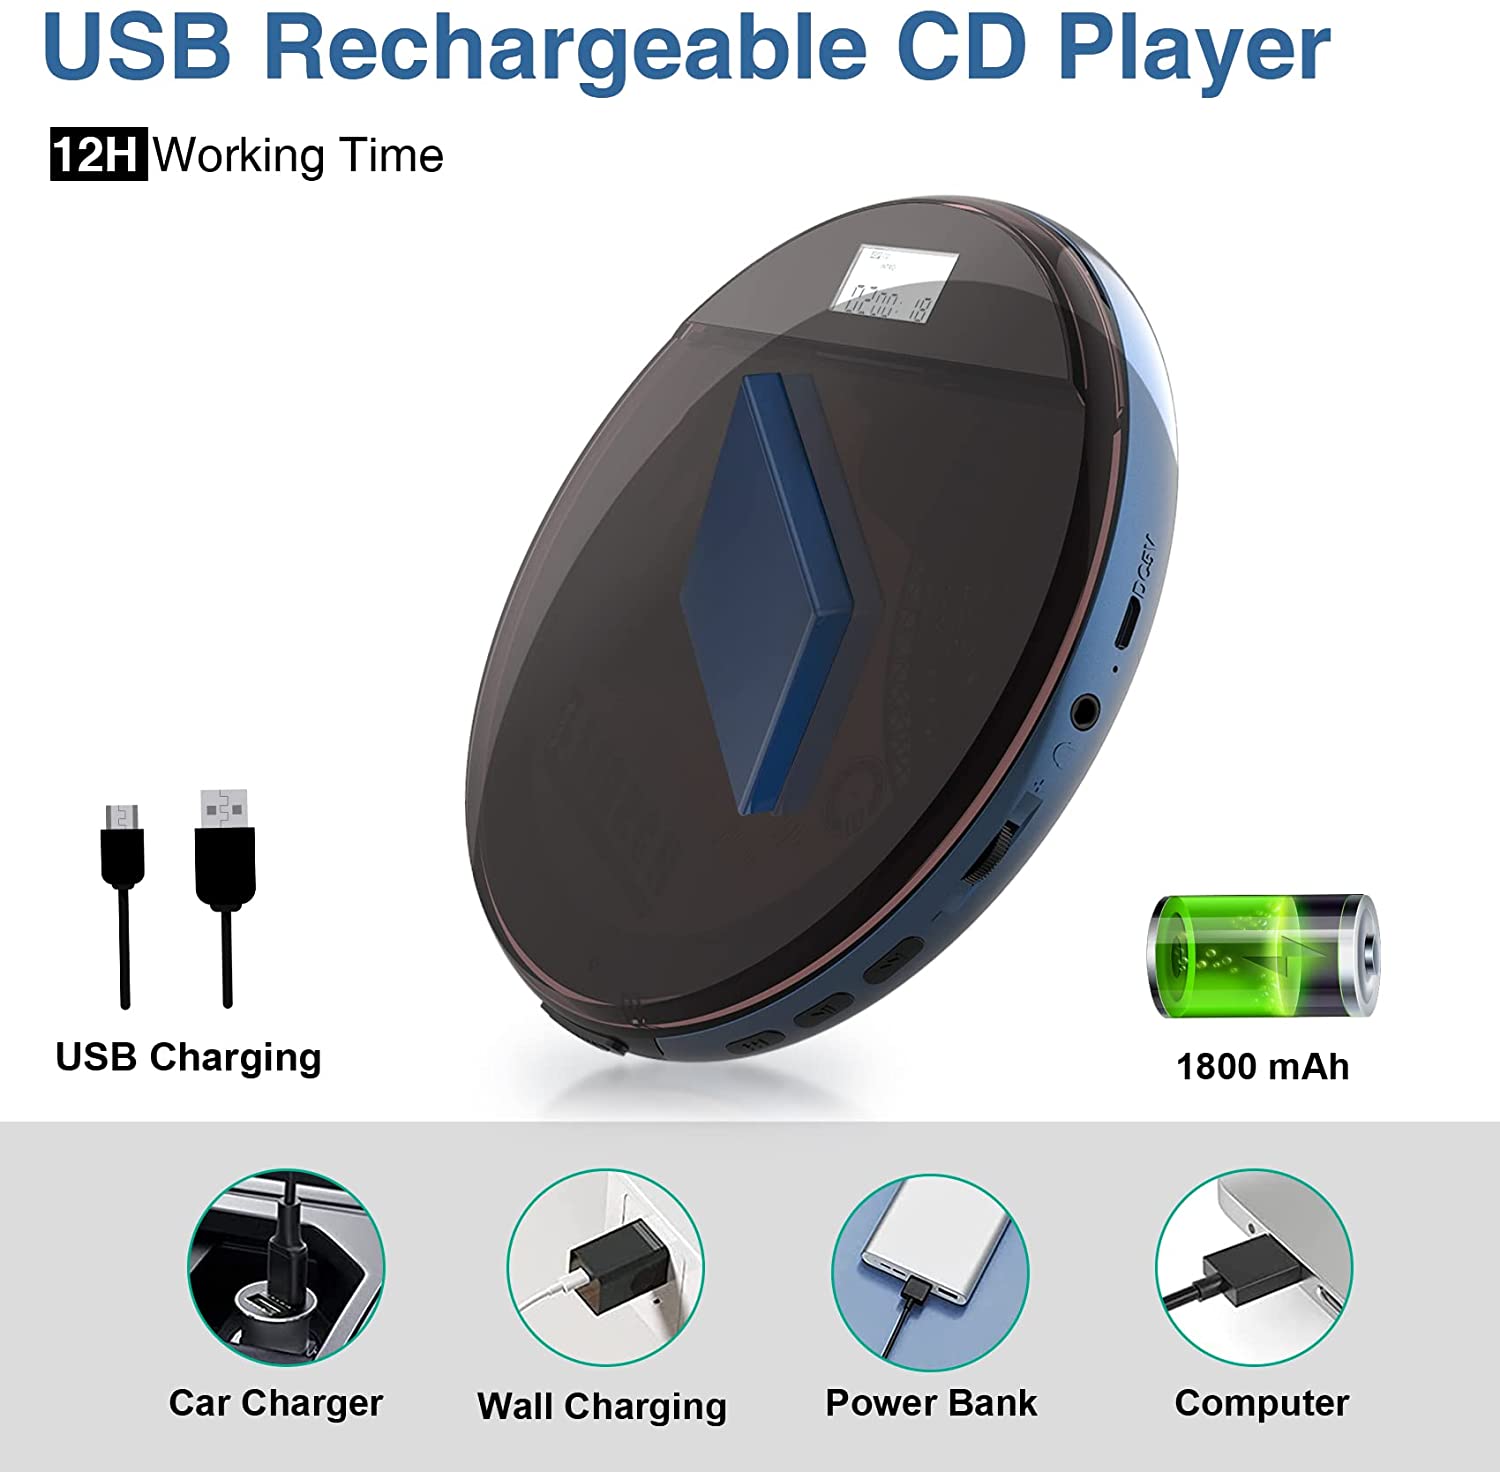 CD Player Portable, MONODEAL Portable CD Player for Car Anti-Skip Protection, Rechargeable Walkman CD Player with Headphones for Running & Traveling, Personal Compact CD Player for Seniors, Adult,Kids